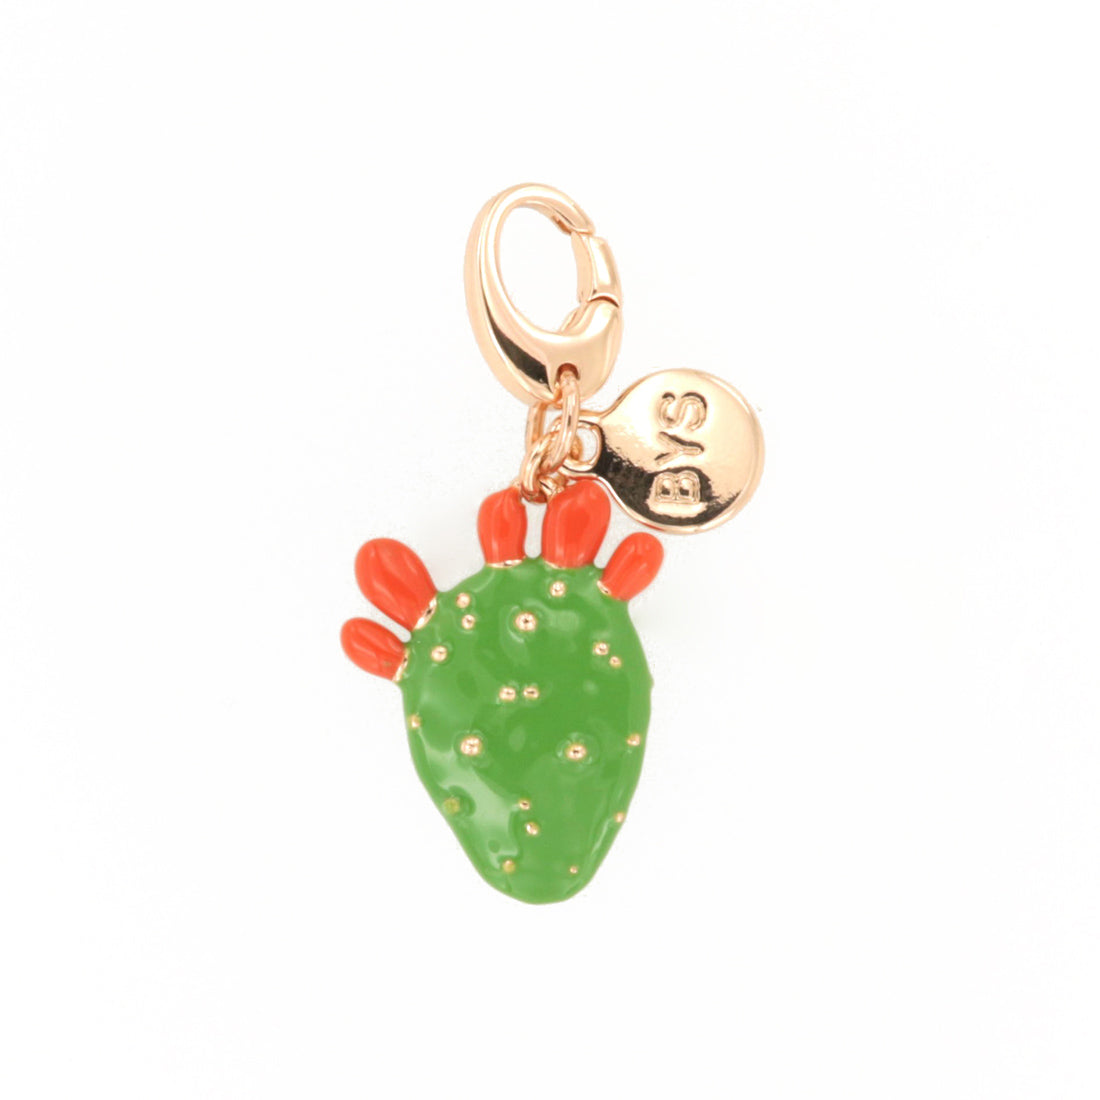 Metal pendant with prickly pear flap enhanced by colored glazes